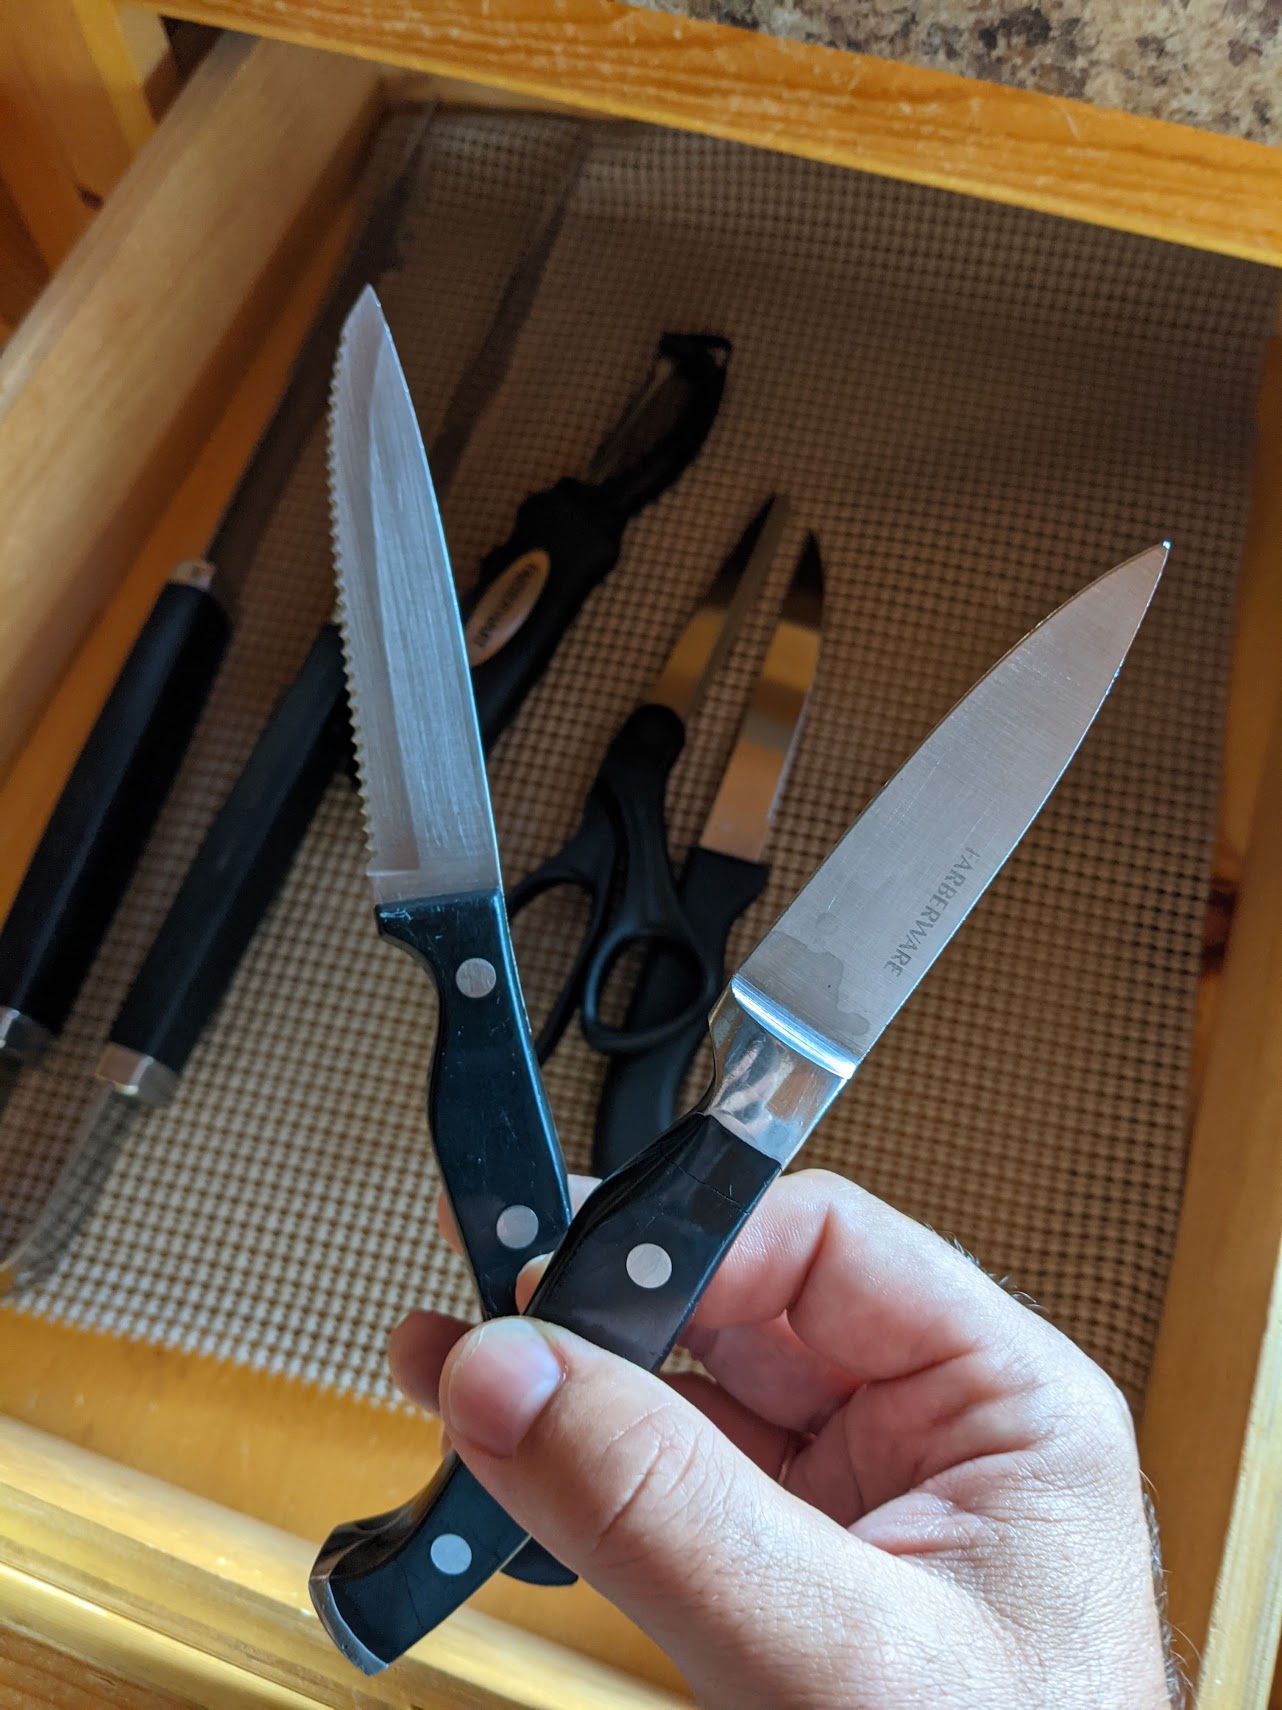 a hand holding a knife and a knife in a drawer